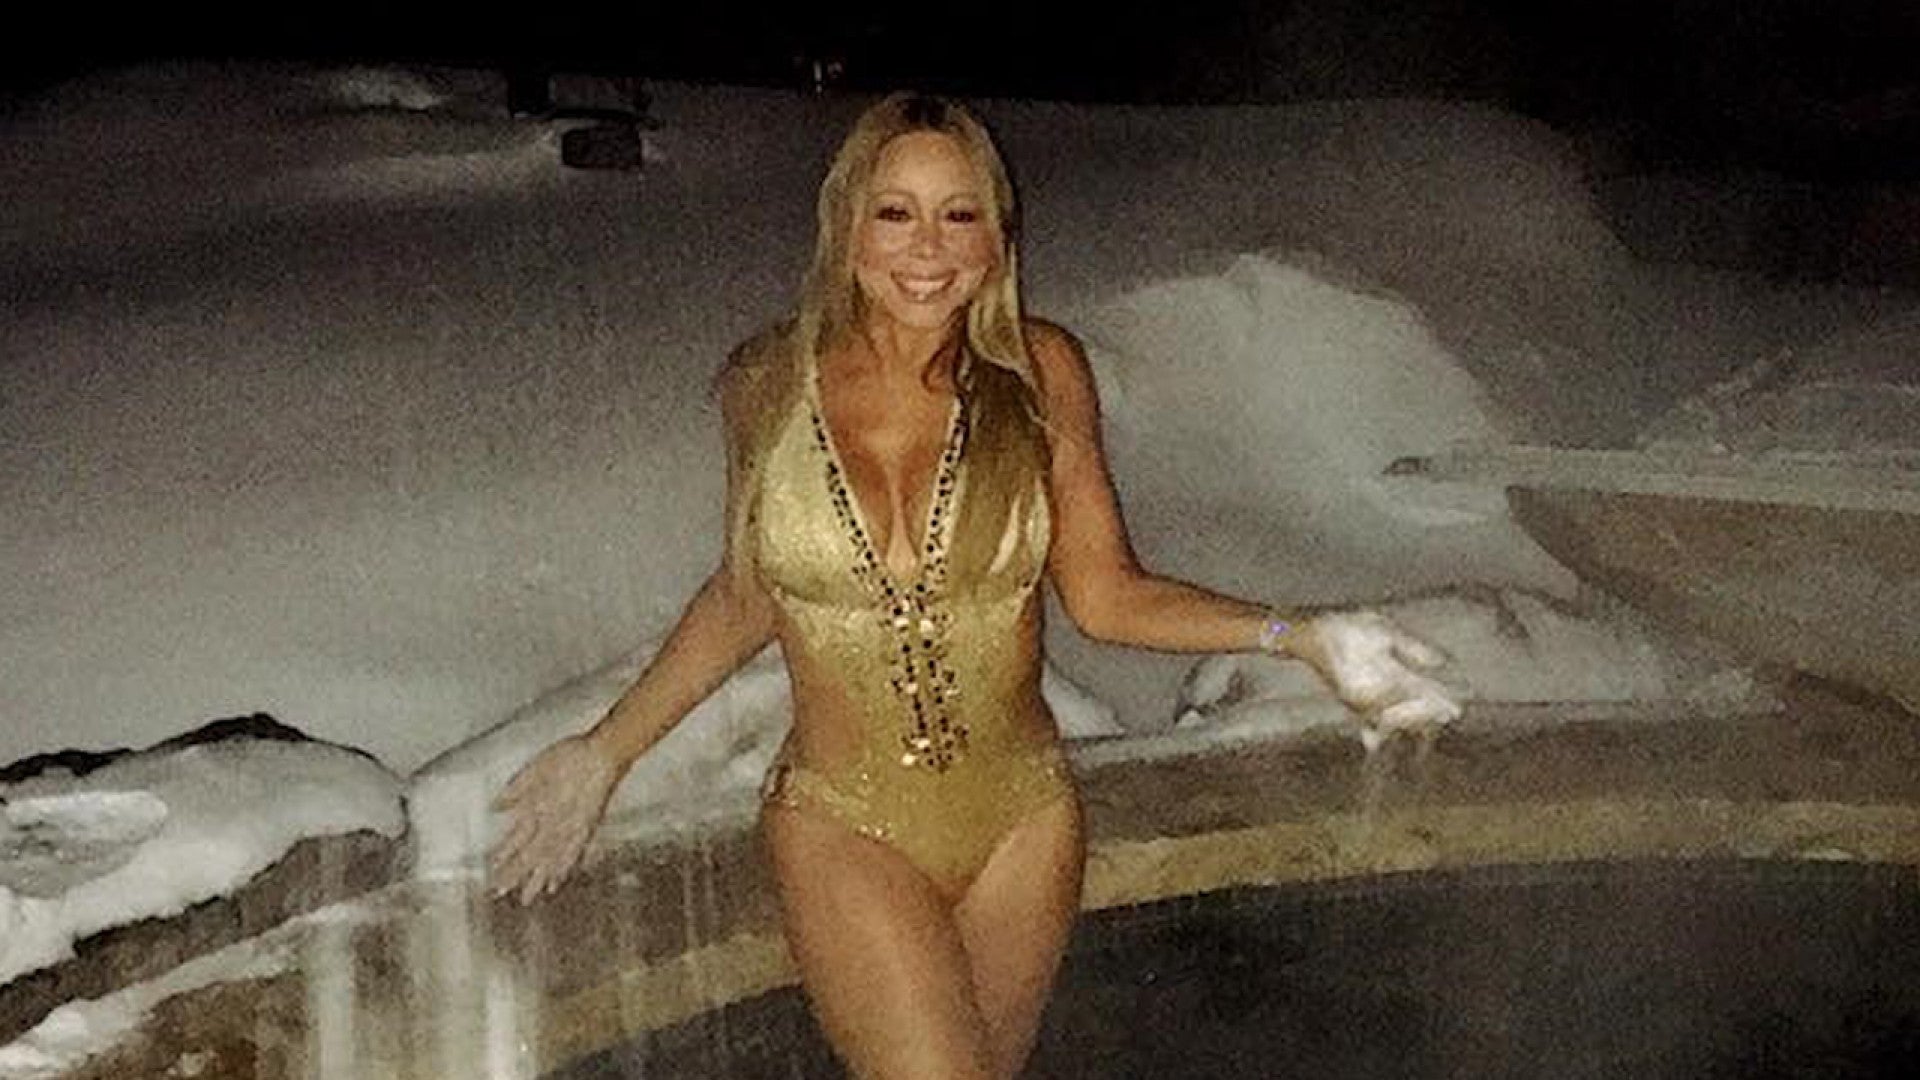 Mariah Carey Strips Down for Sexy, Snow-Covered Swimsuit